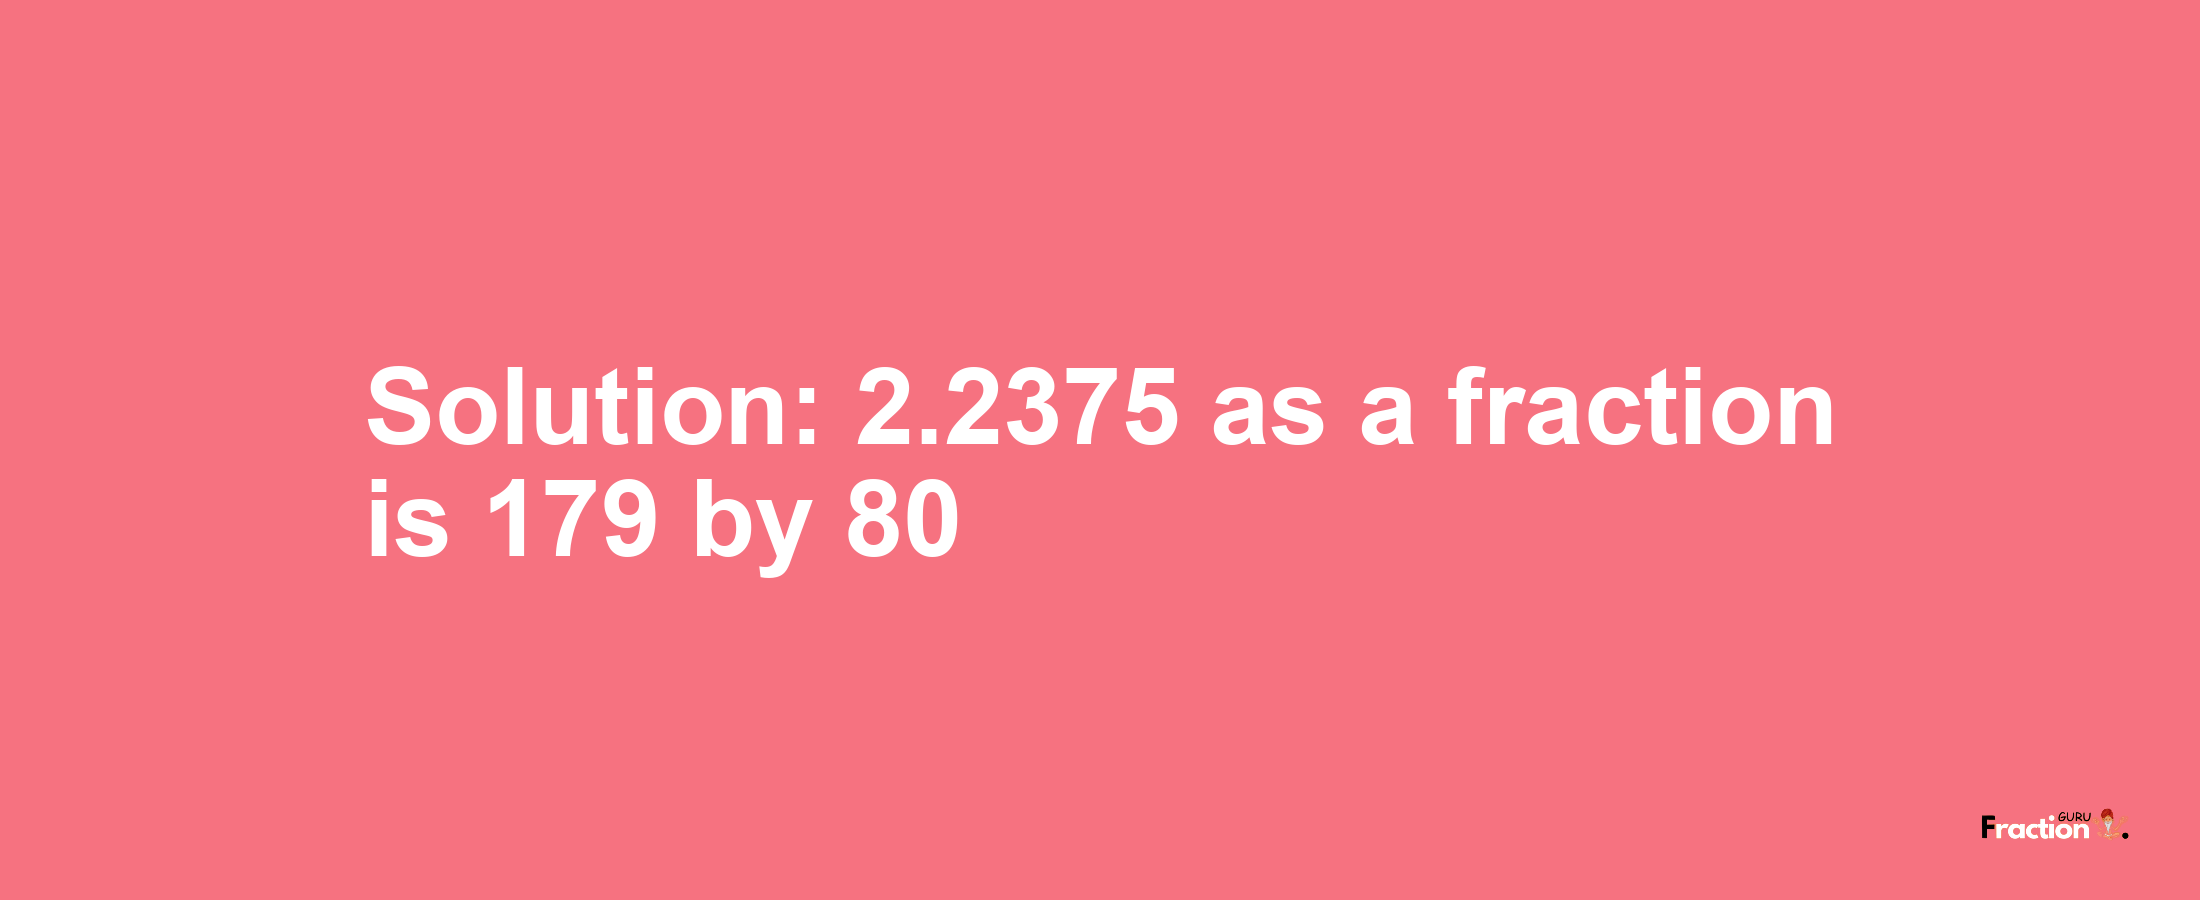 Solution:2.2375 as a fraction is 179/80